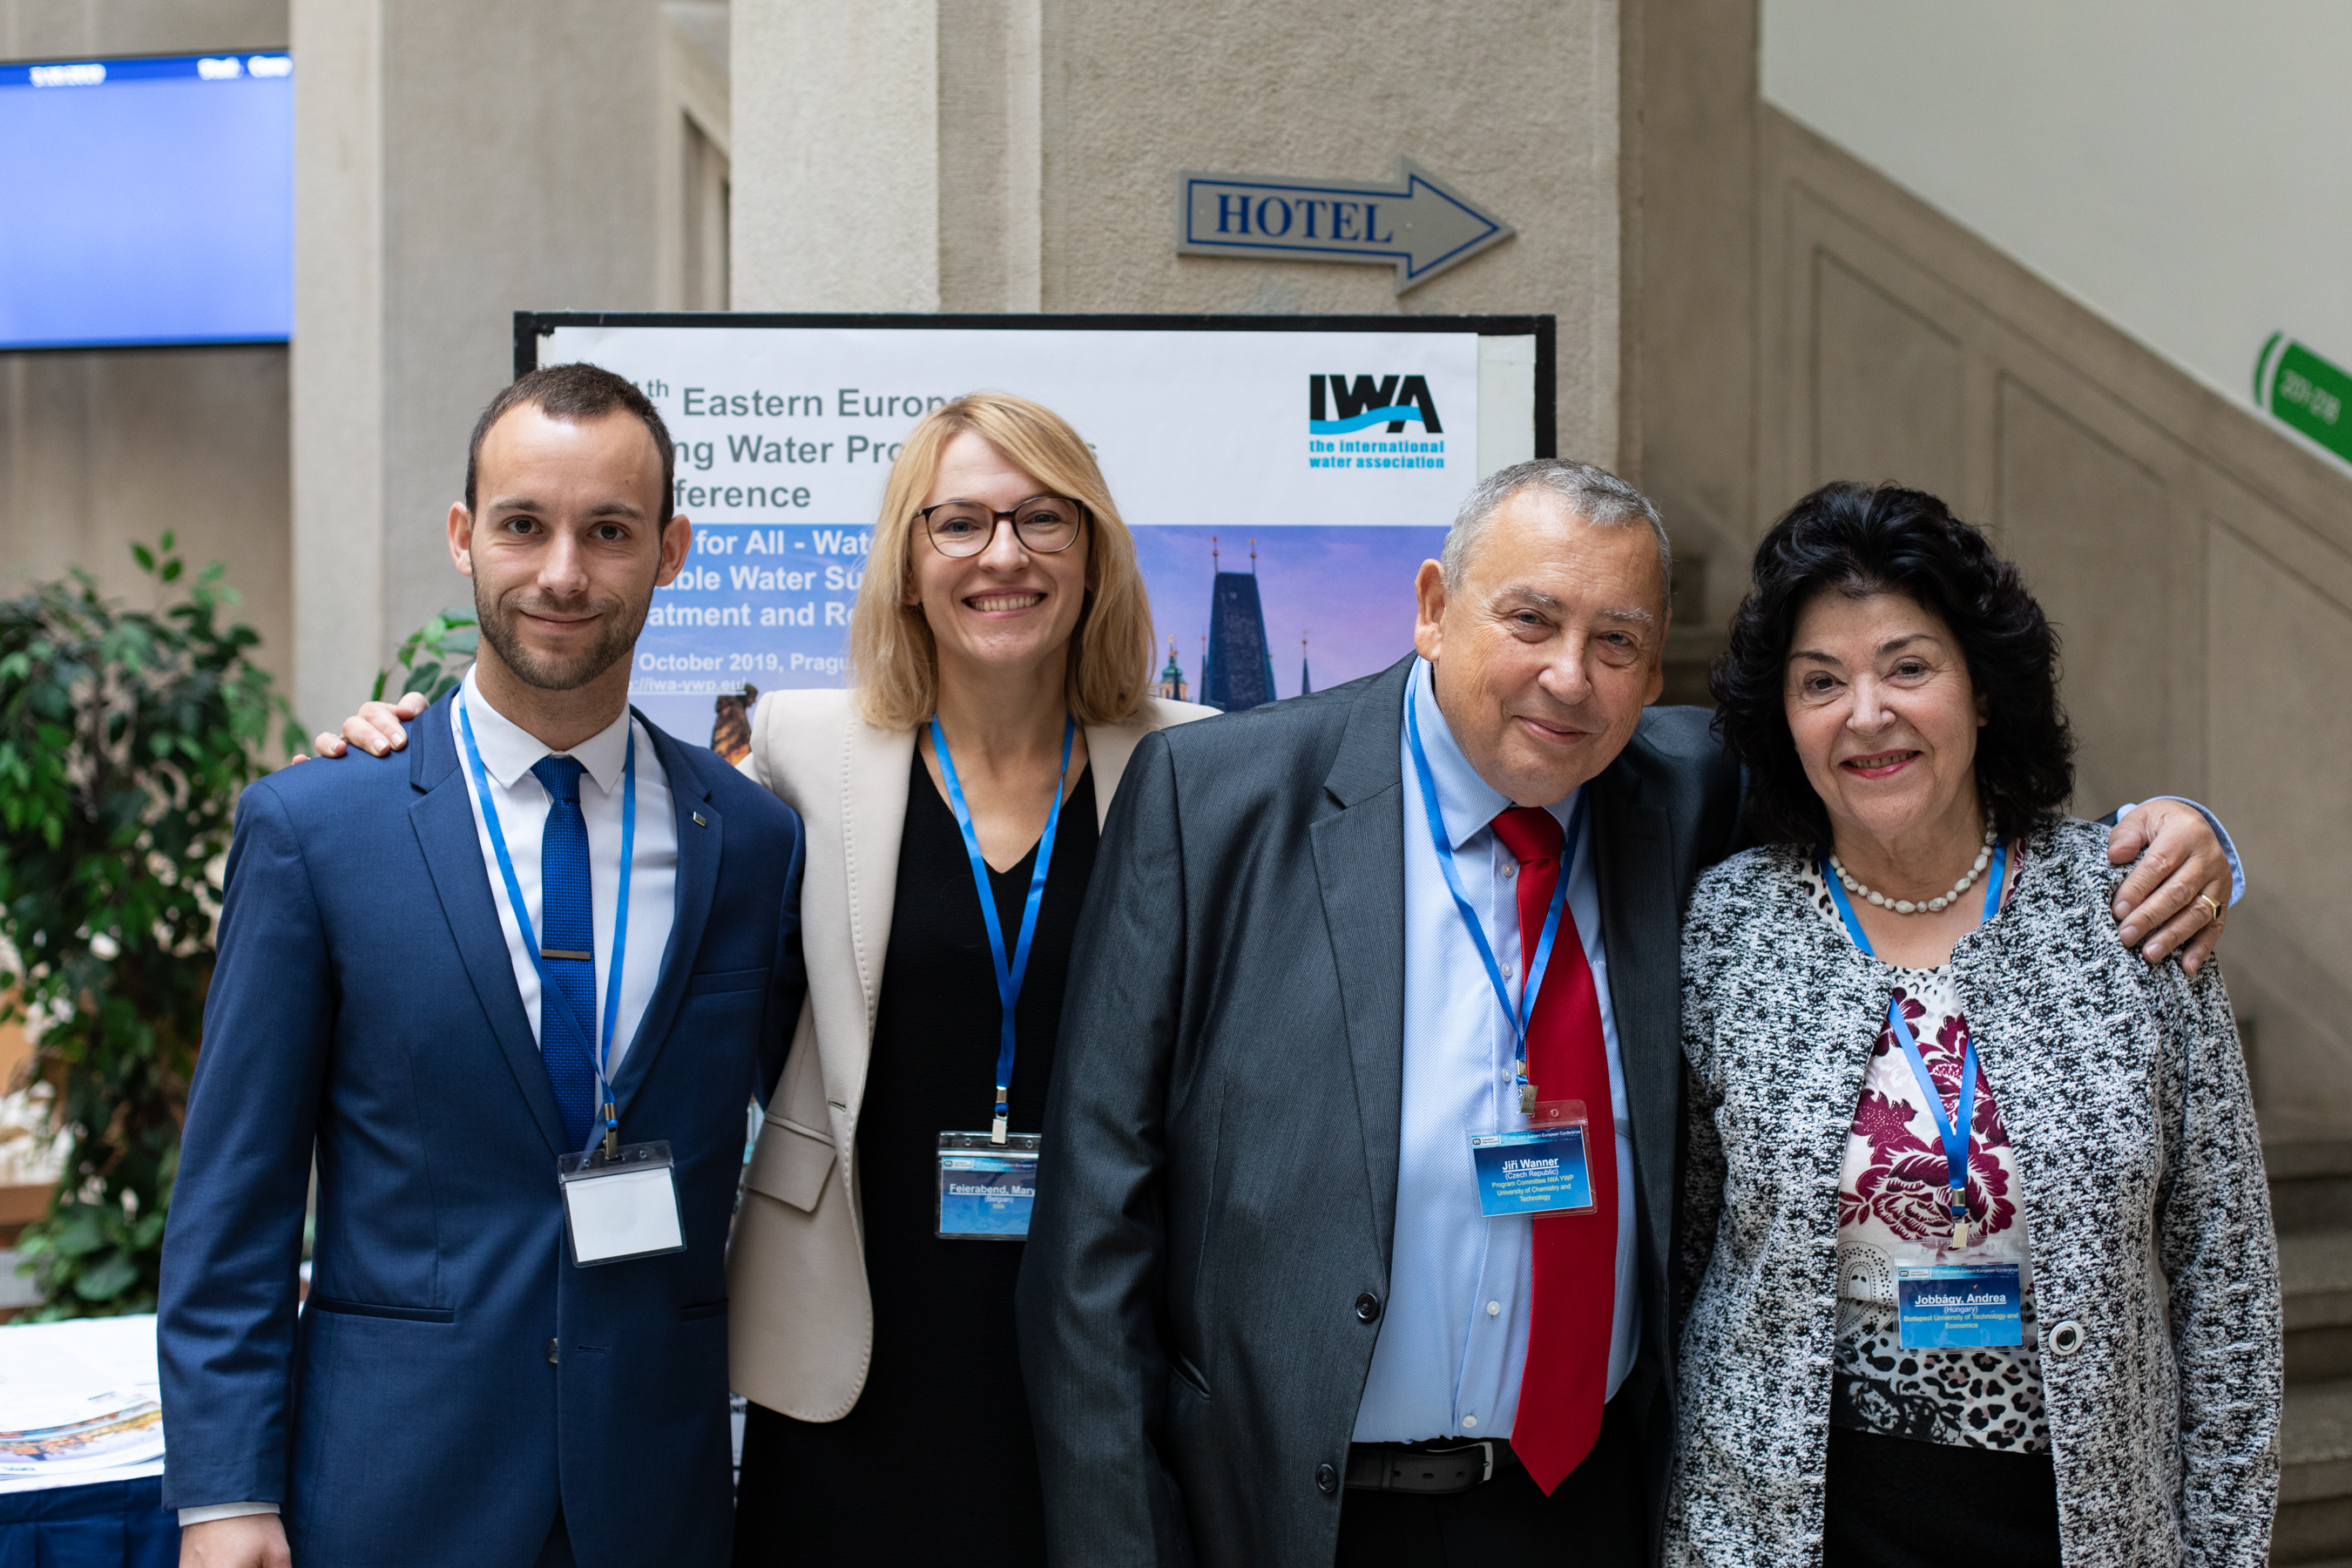 11th Eastern European Young Water Professionals Conference 